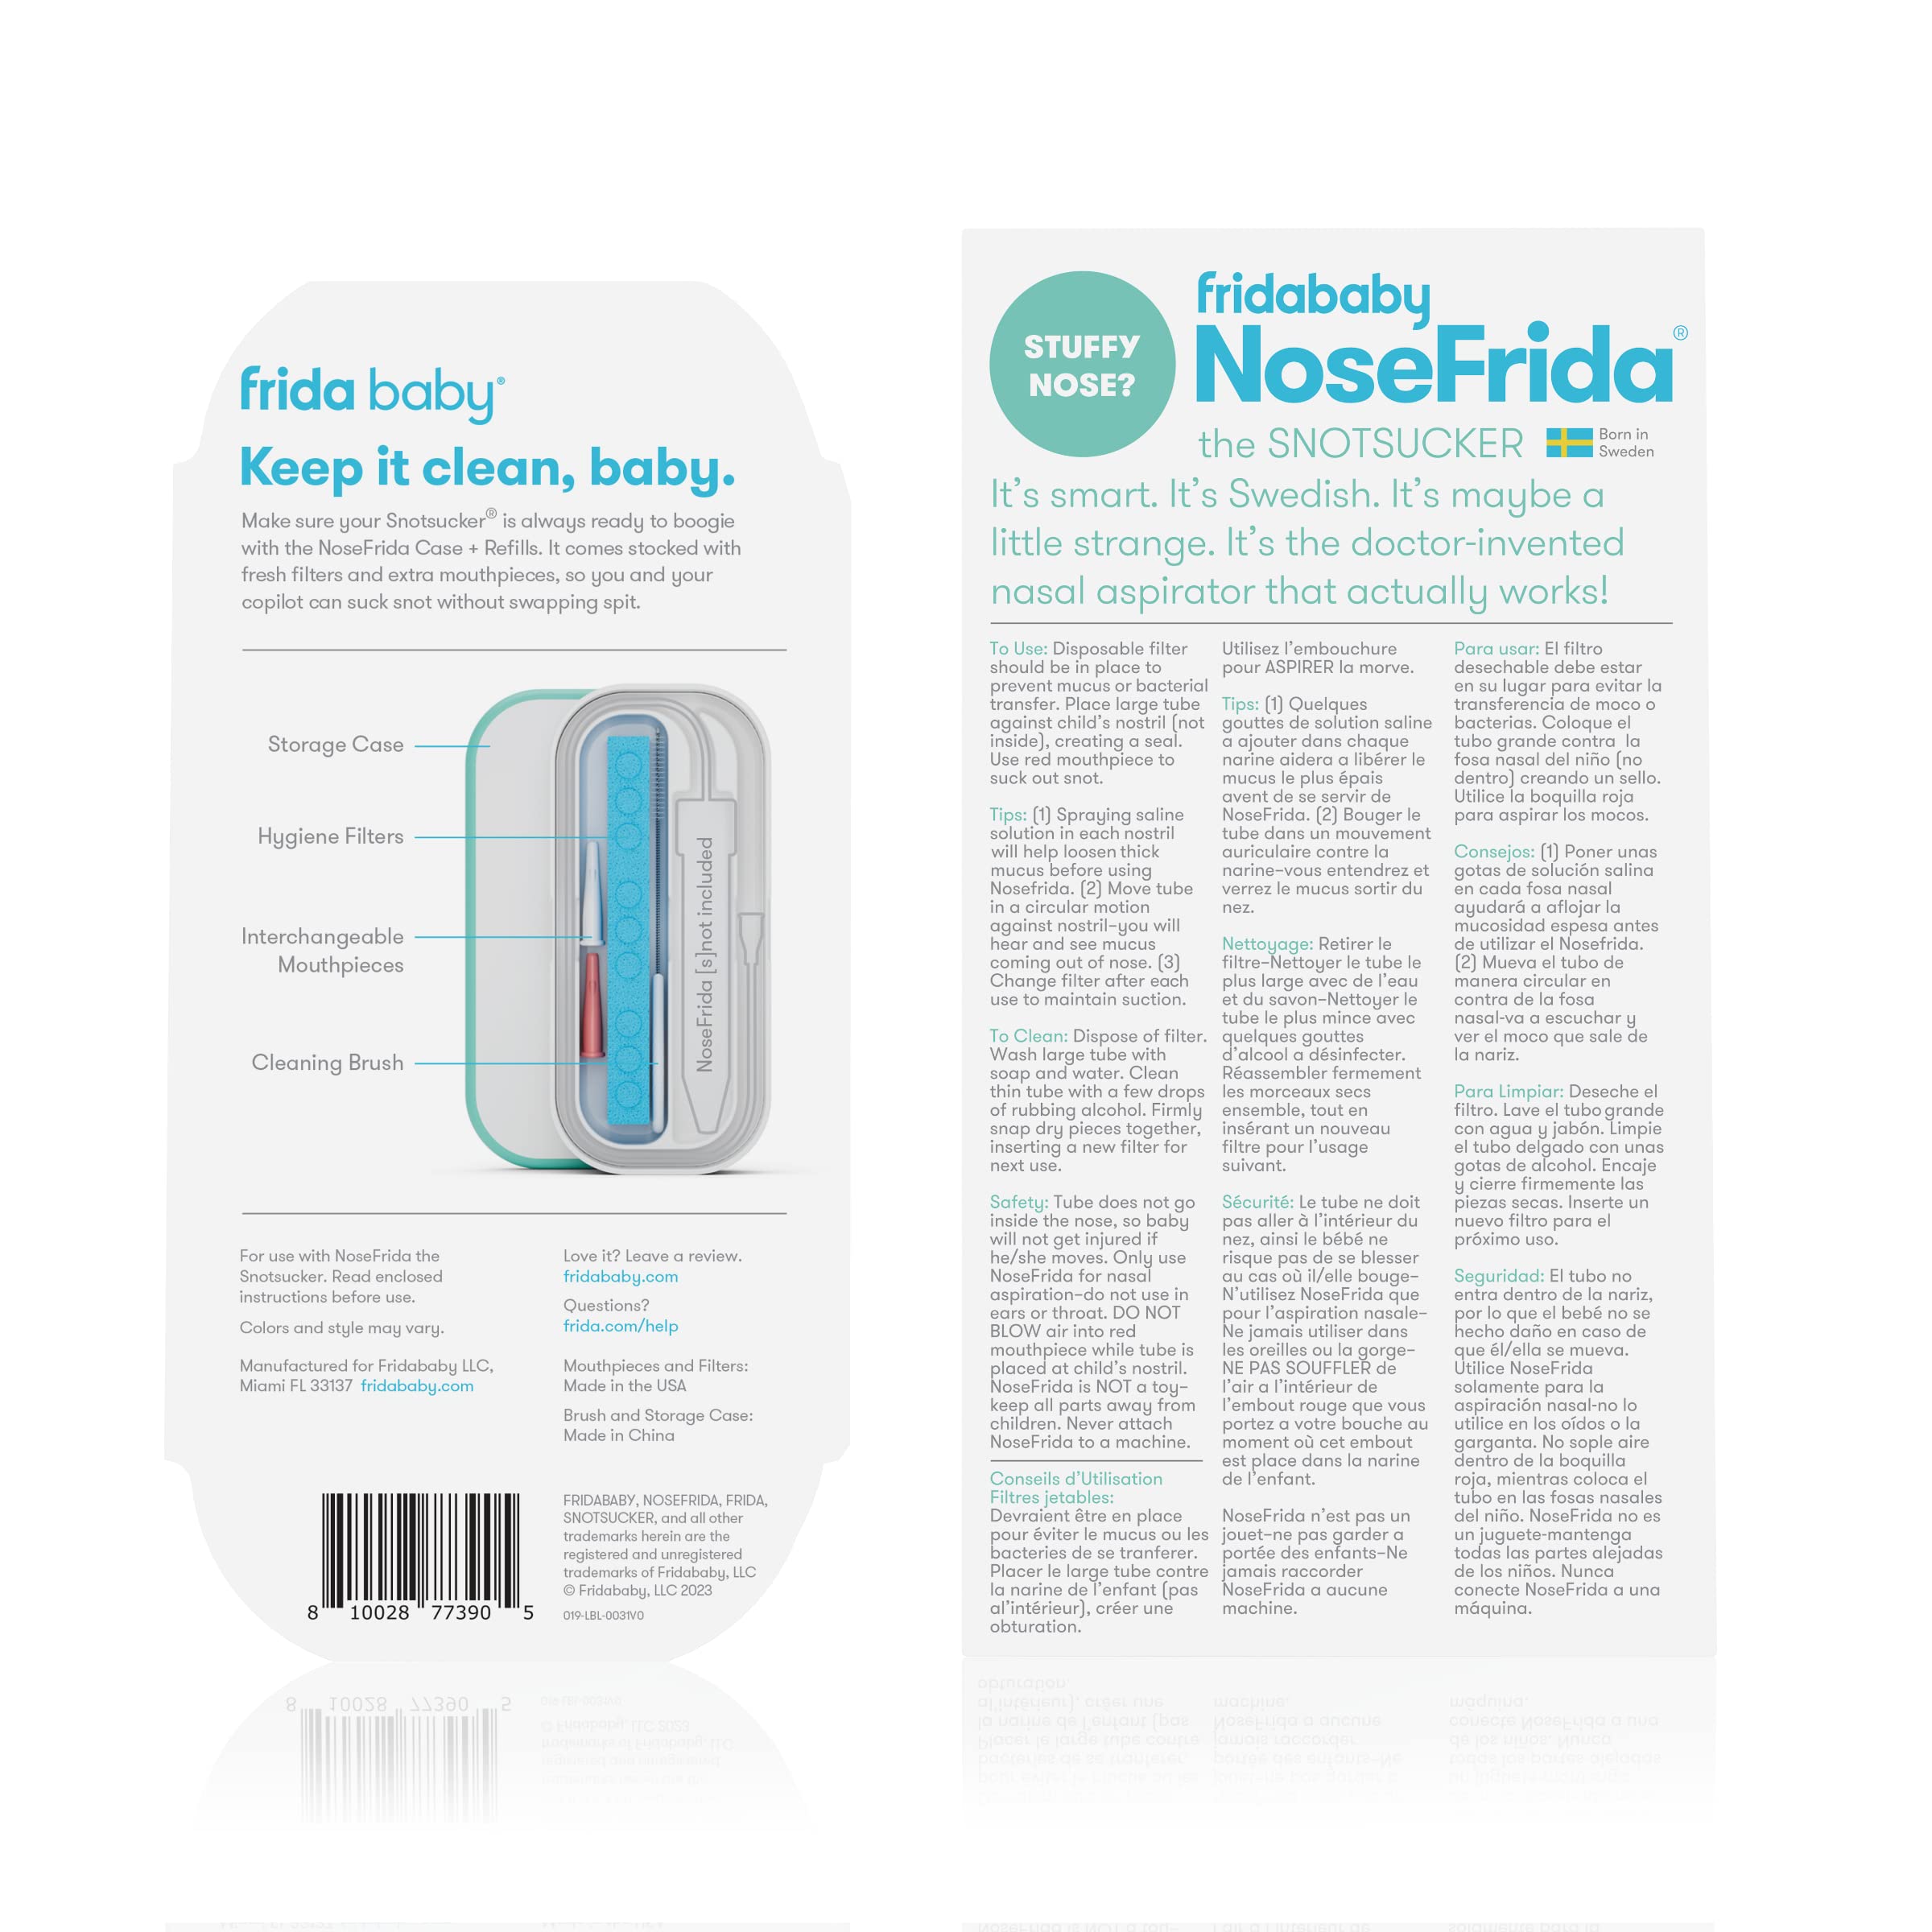 Bundle of Frida Baby Baby Nasal Aspirator NoseFrida The Snotsucker + Frida Baby NoseFrida Case + Refills | Cleaning and Storage for Doctor-Recommended NoseFrida The Snotsucker Nasal Aspirator